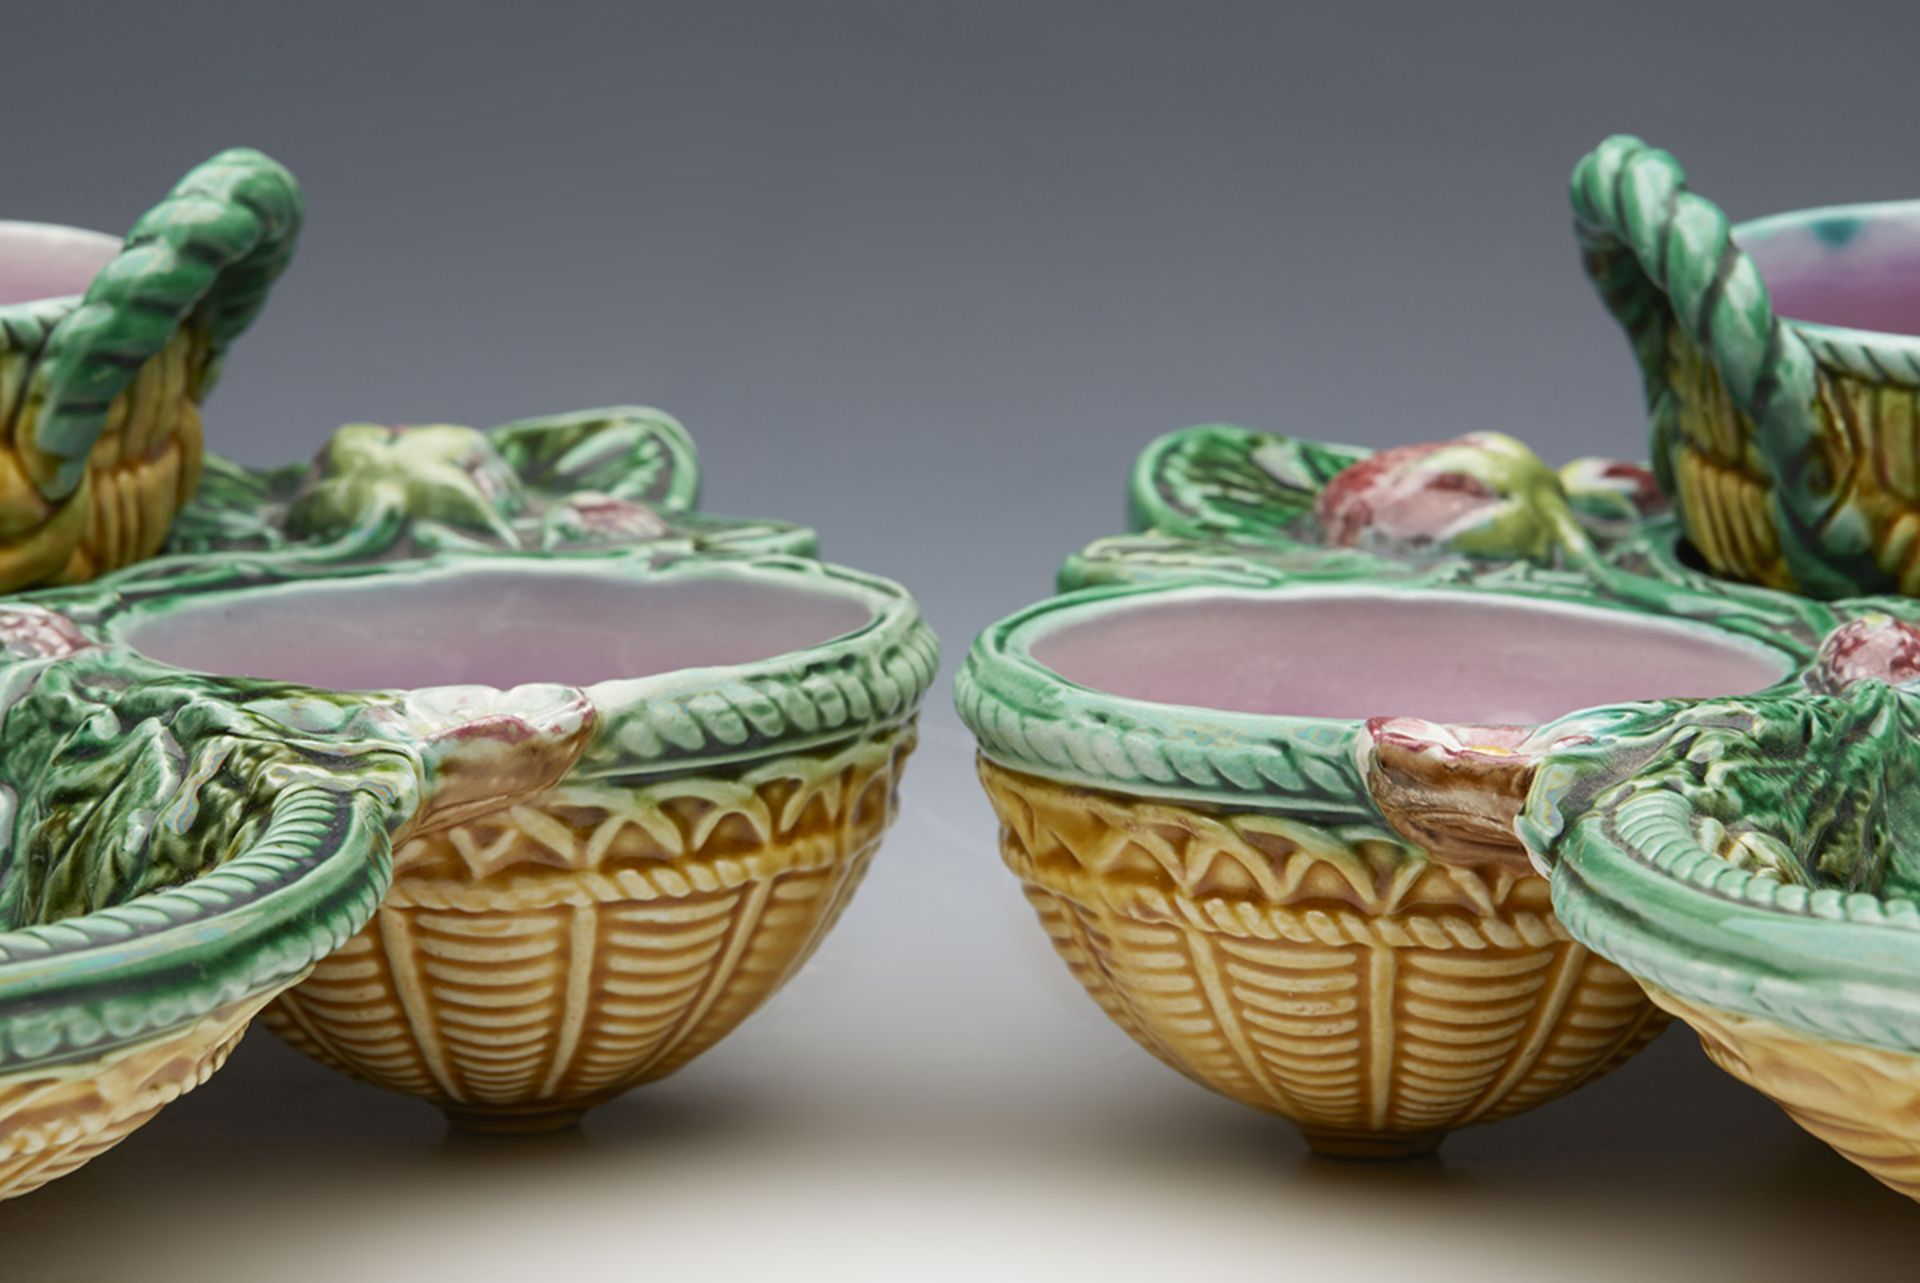 Pair Antique George Jones Majolica Strawberry Serving Dishes 1868 - Image 5 of 10